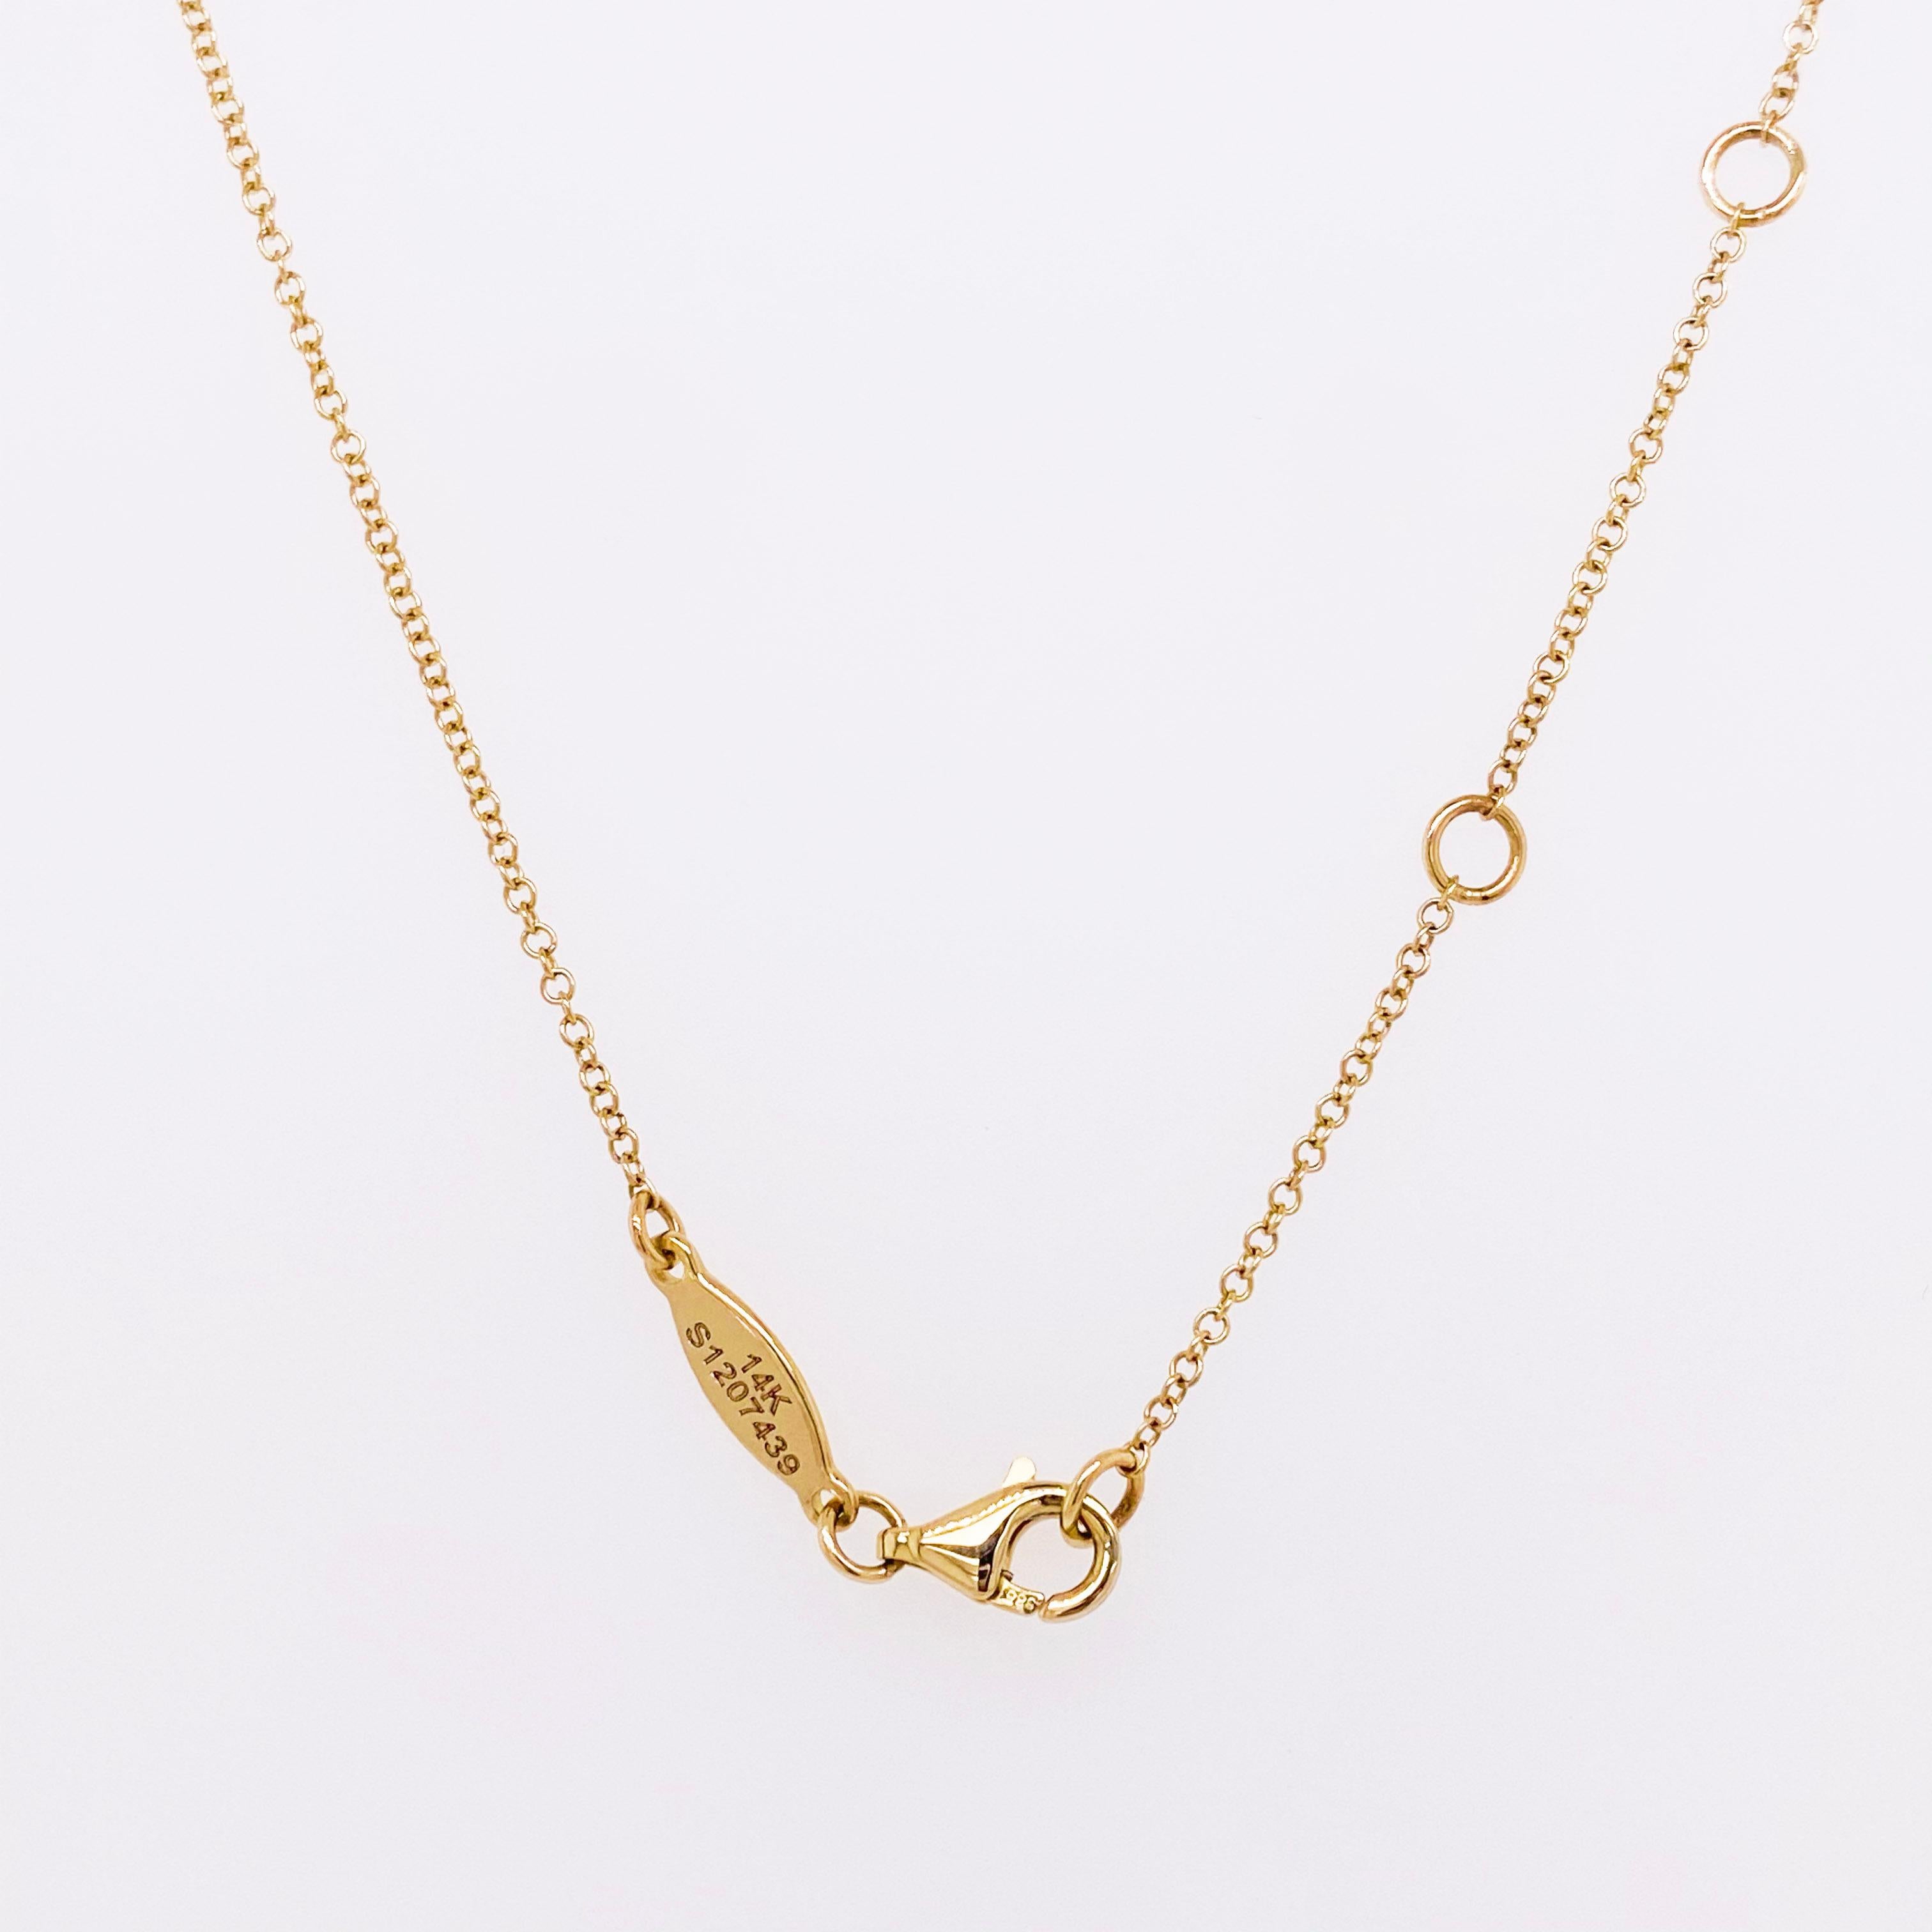 Waterfall Chain Necklace, 14 Karat Yellow Gold Curved Bar, NeckMess In New Condition For Sale In Austin, TX